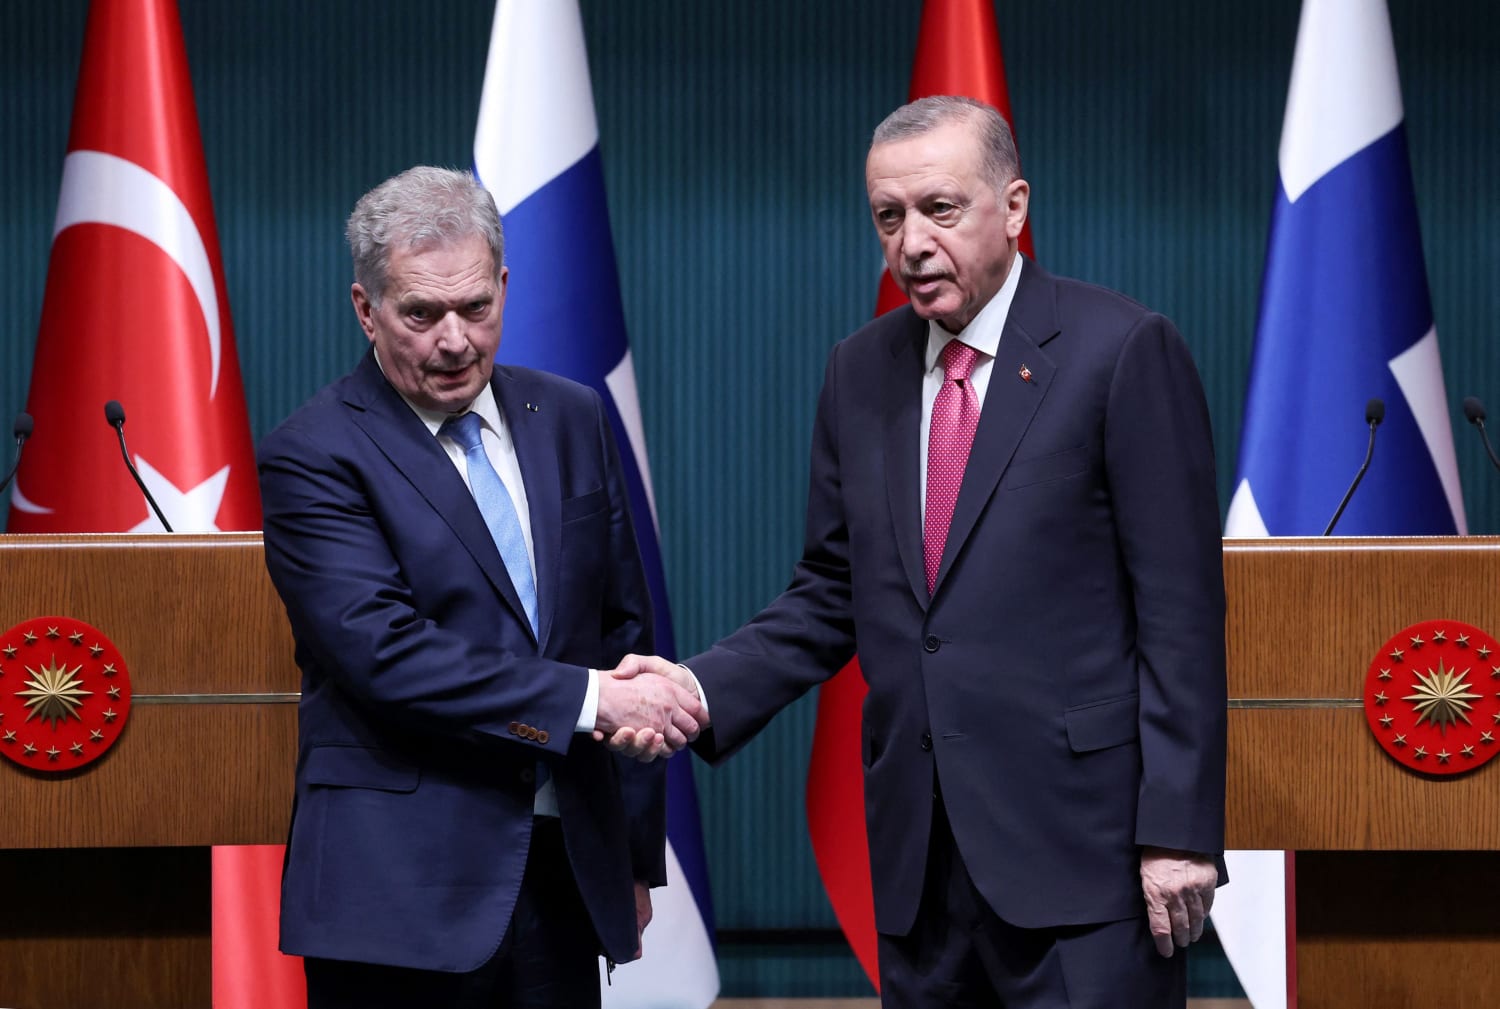 Finland cleared to join NATO as hold-out Turkey ratifies its membership